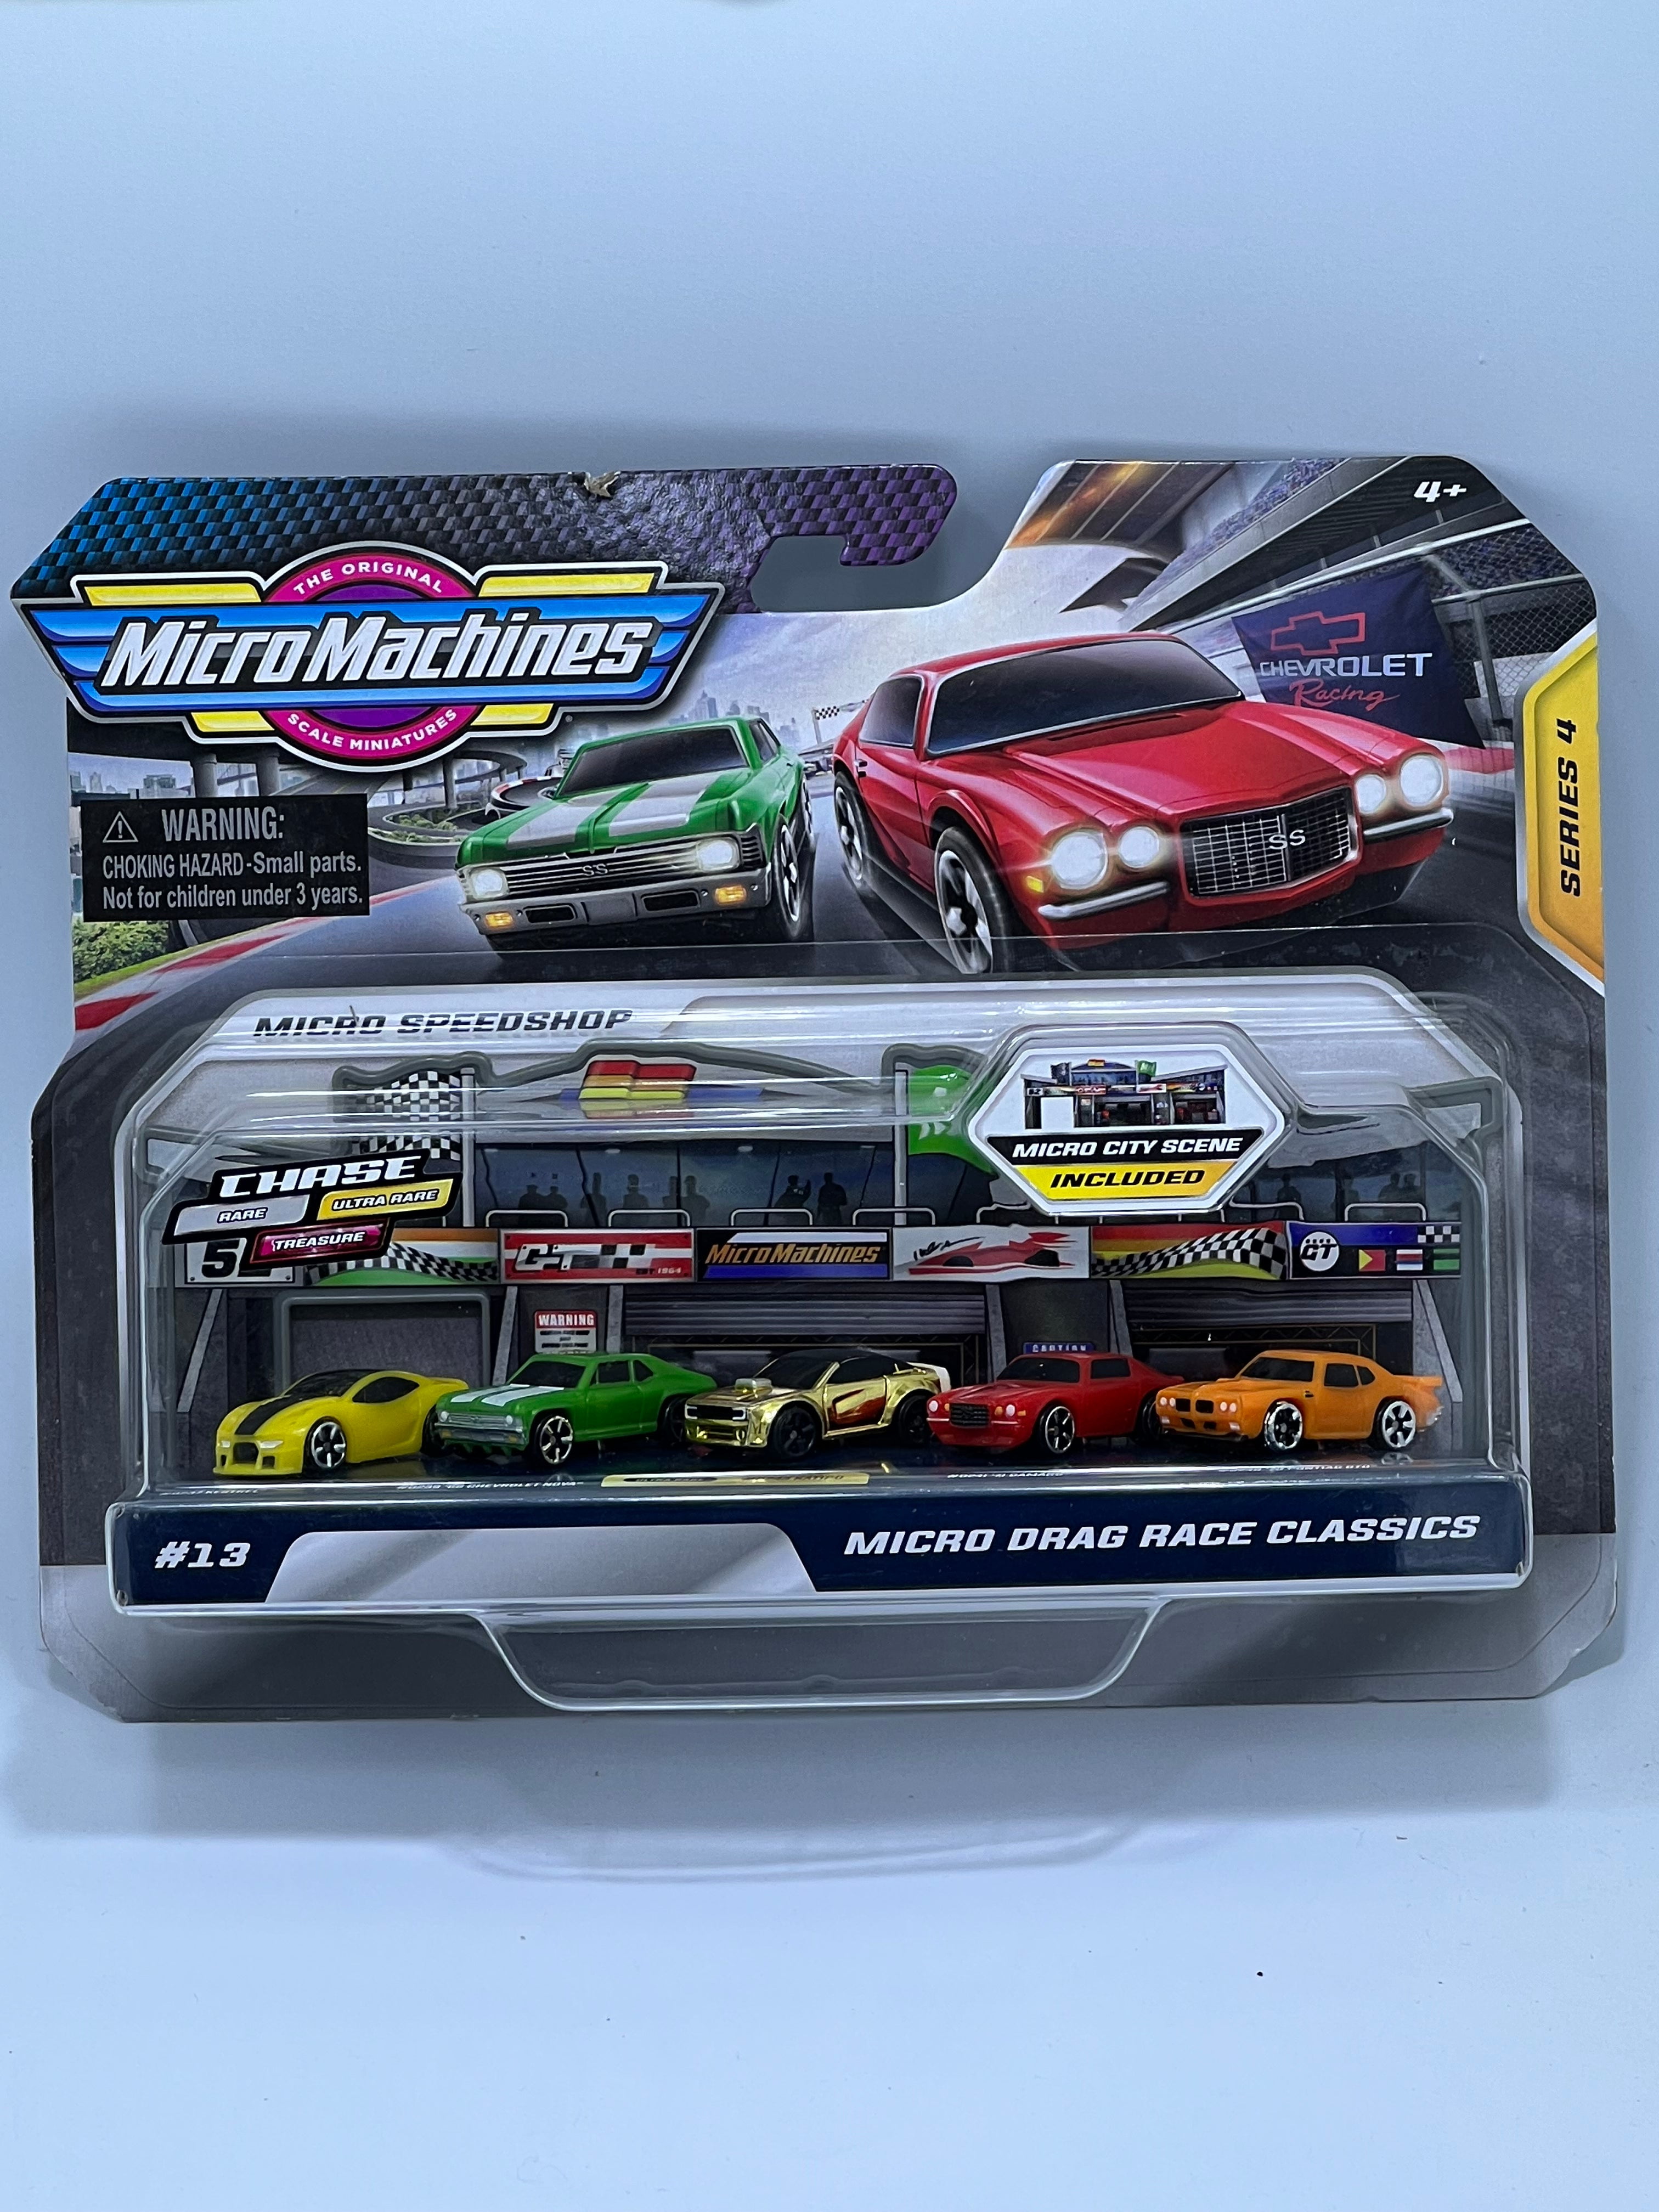 Collect Them All Tow and Delivery Trucks Garbage City Center Plus Corresponding MM Scene Features 5 Highly Detailed Vehicles: Taxi Mail Micro Machines World Packs 